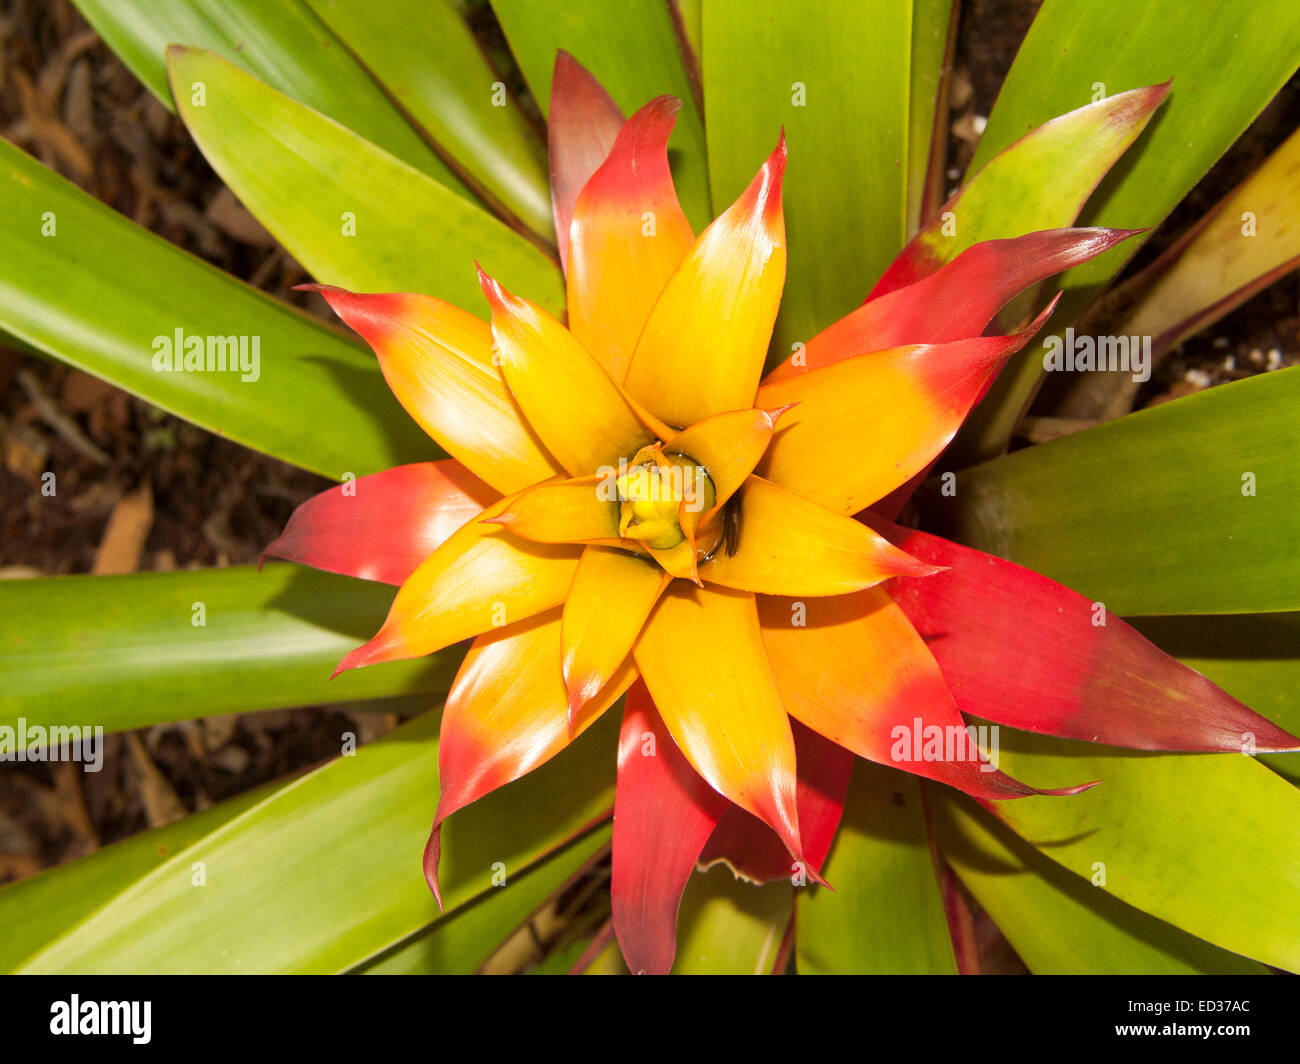 Stunning yellow flower bracts tipped with flame red & surrounded by green leaves of bromeliad,Guzmania 'Soledo' Stock Photo